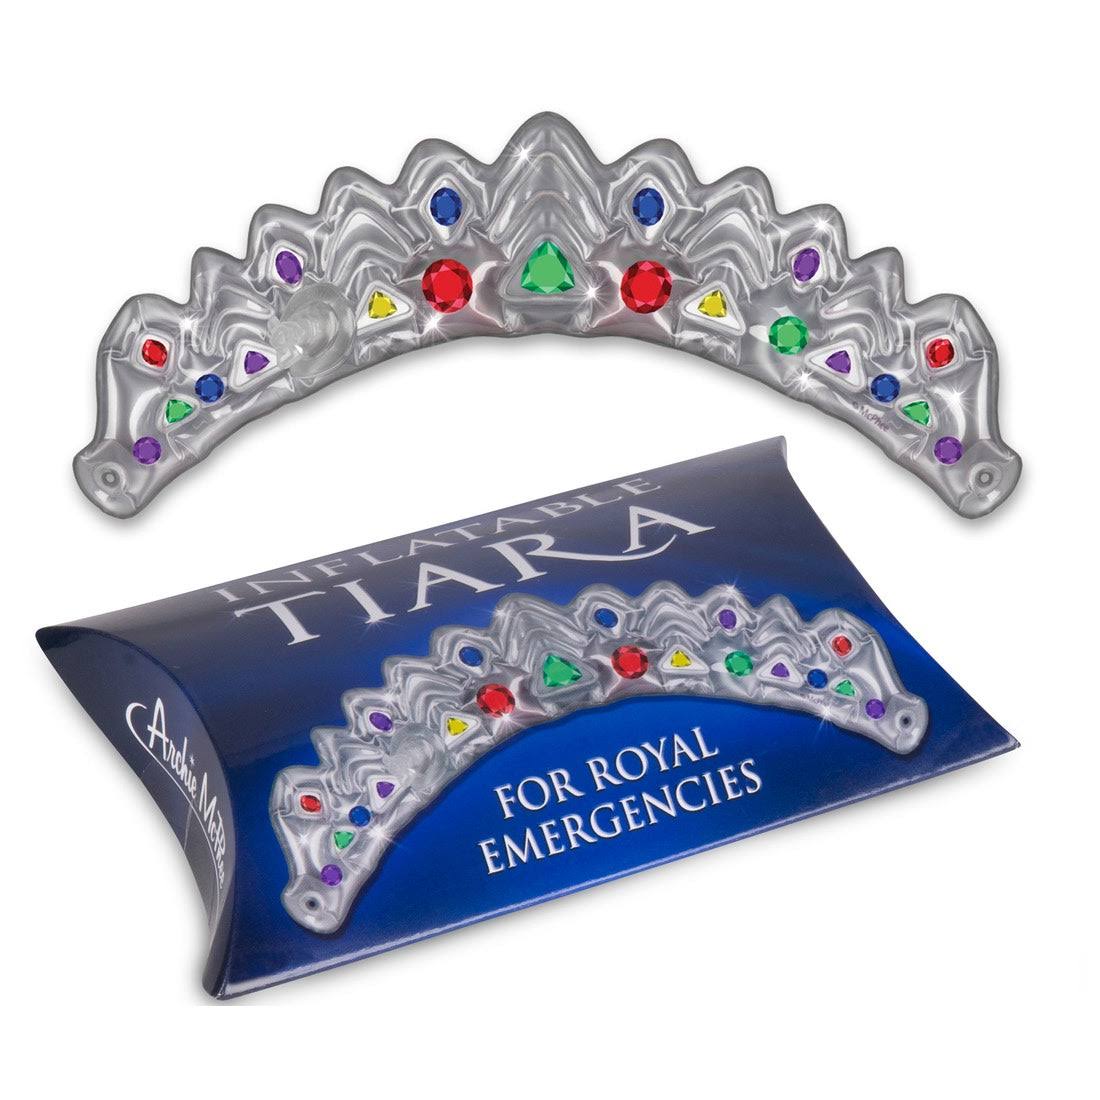 Character Goods - Archie McPhee - Inflatable Tiara New 12839